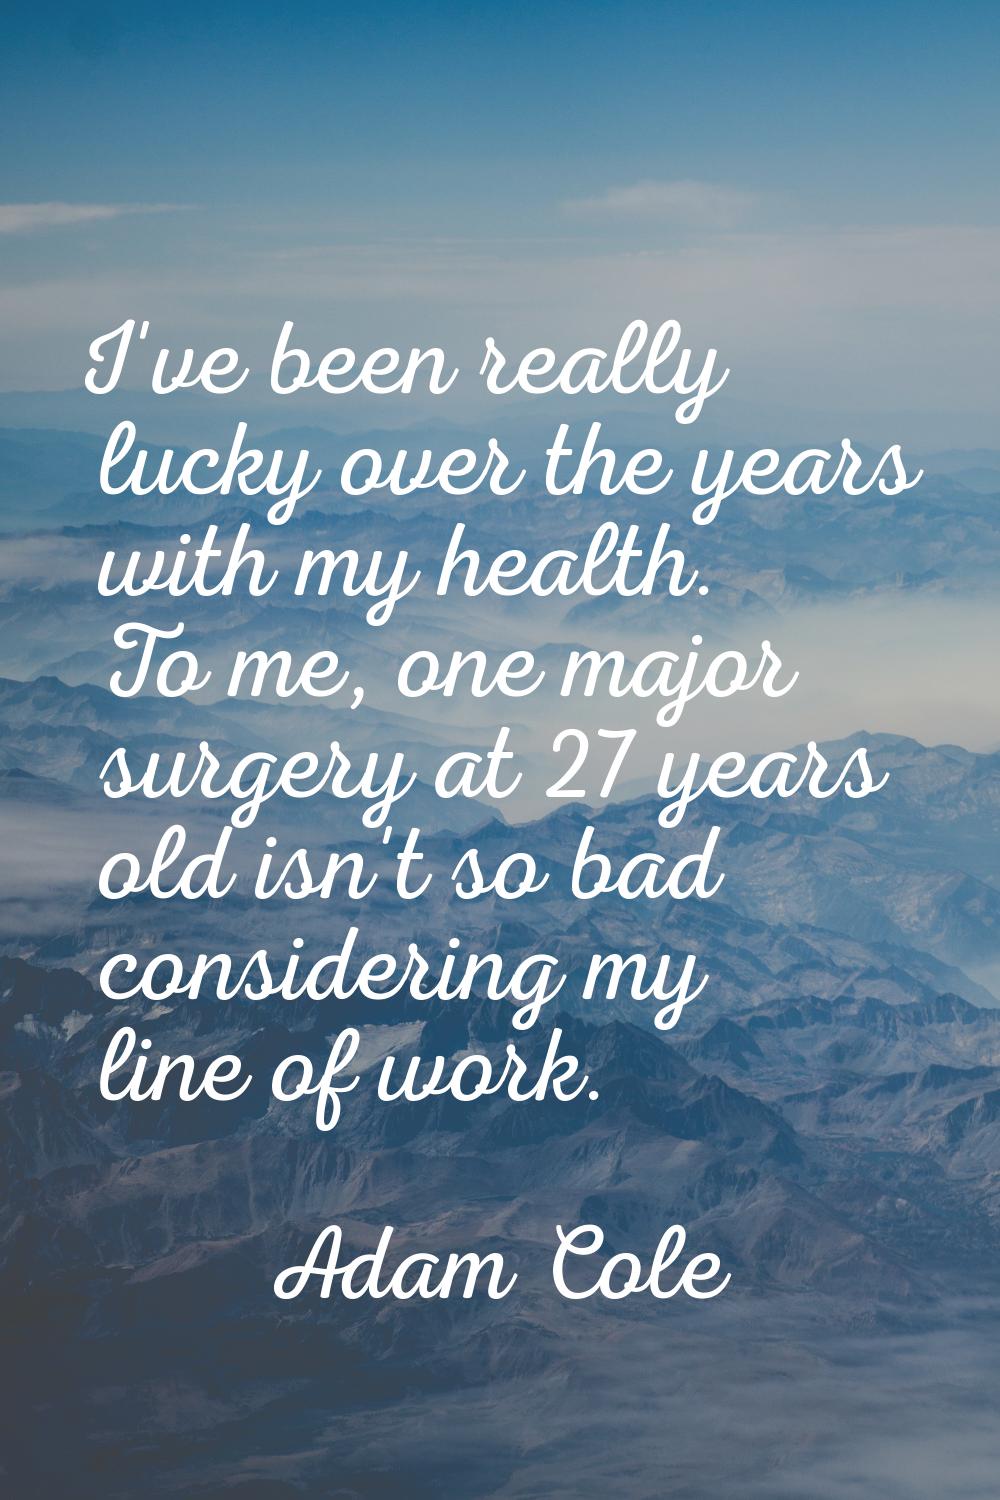 I've been really lucky over the years with my health. To me, one major surgery at 27 years old isn'